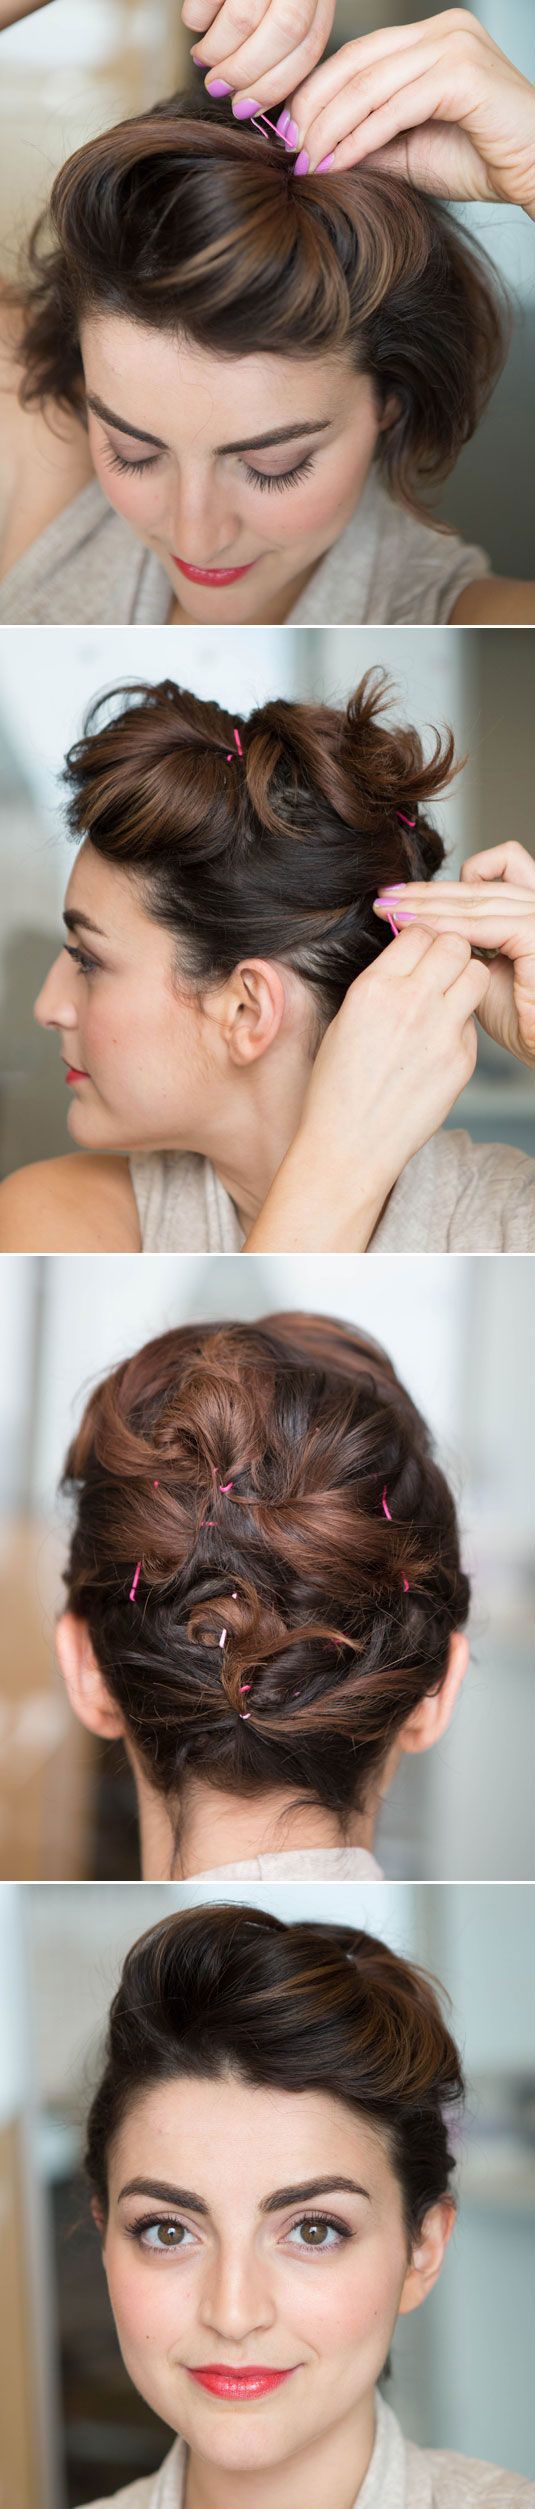 Pinned Updo Hairstyle Tutorial for Short Hair